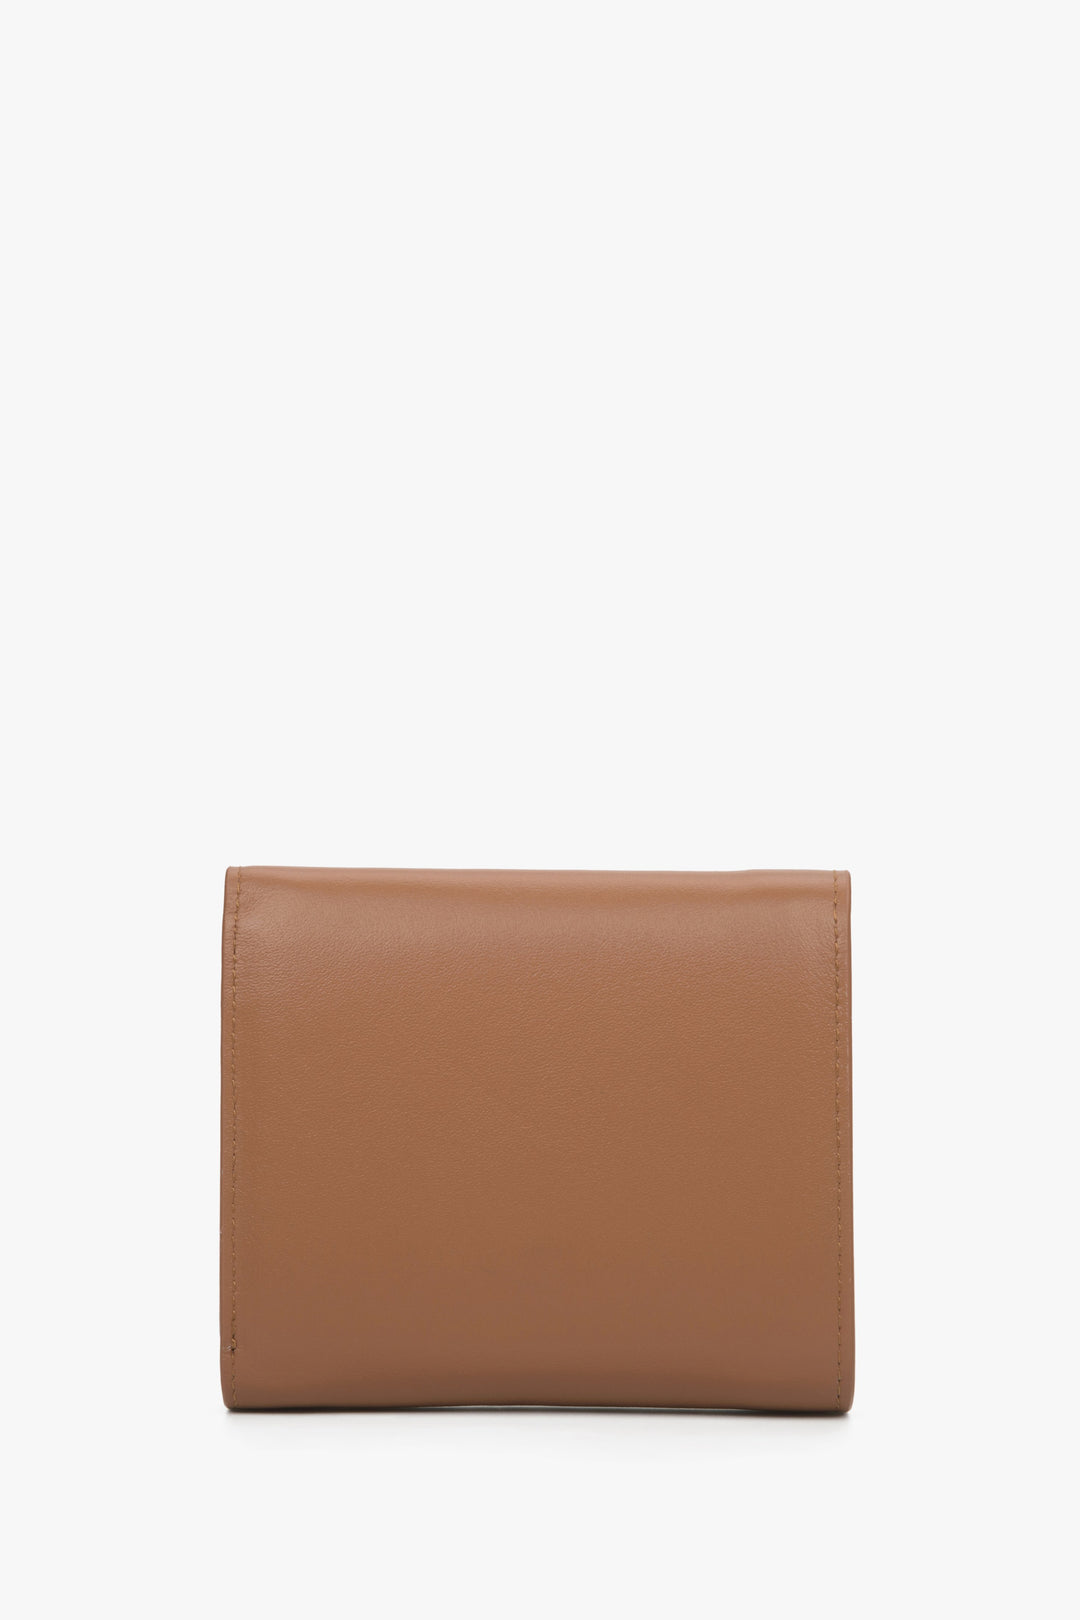 The back of the small brown  women's wallet by Estro.